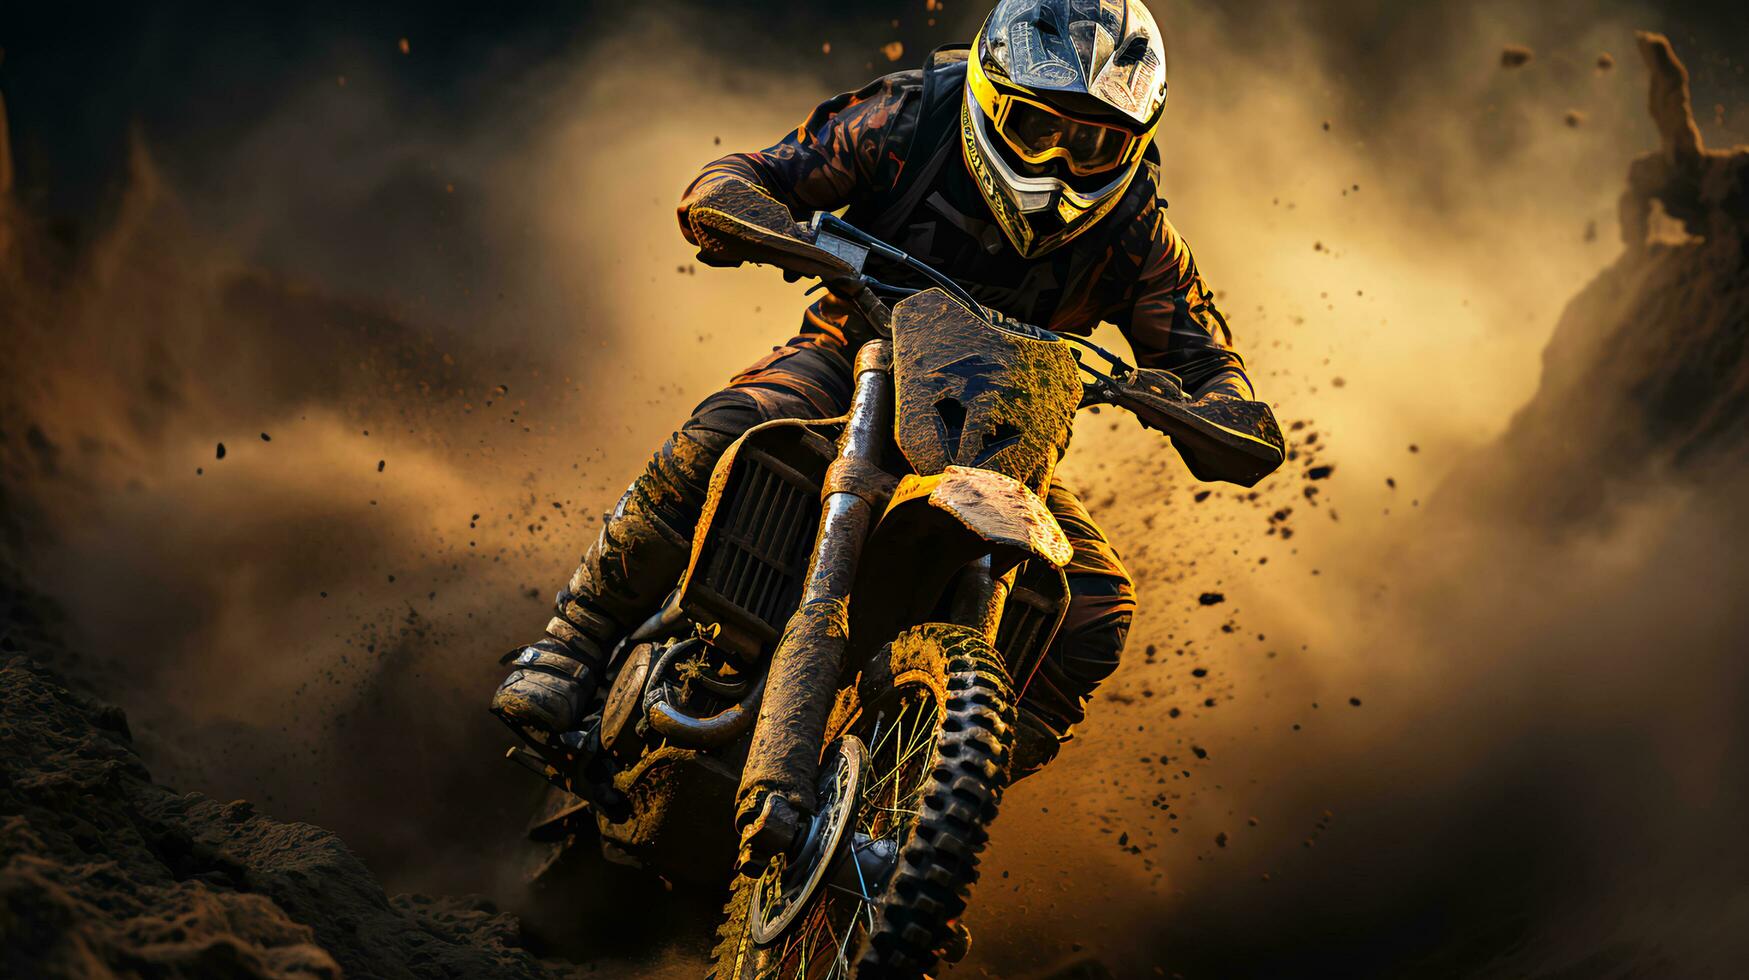 Motorcyclist rides a rally motorcycle through mud and sand on the off-road during a motocross race photo